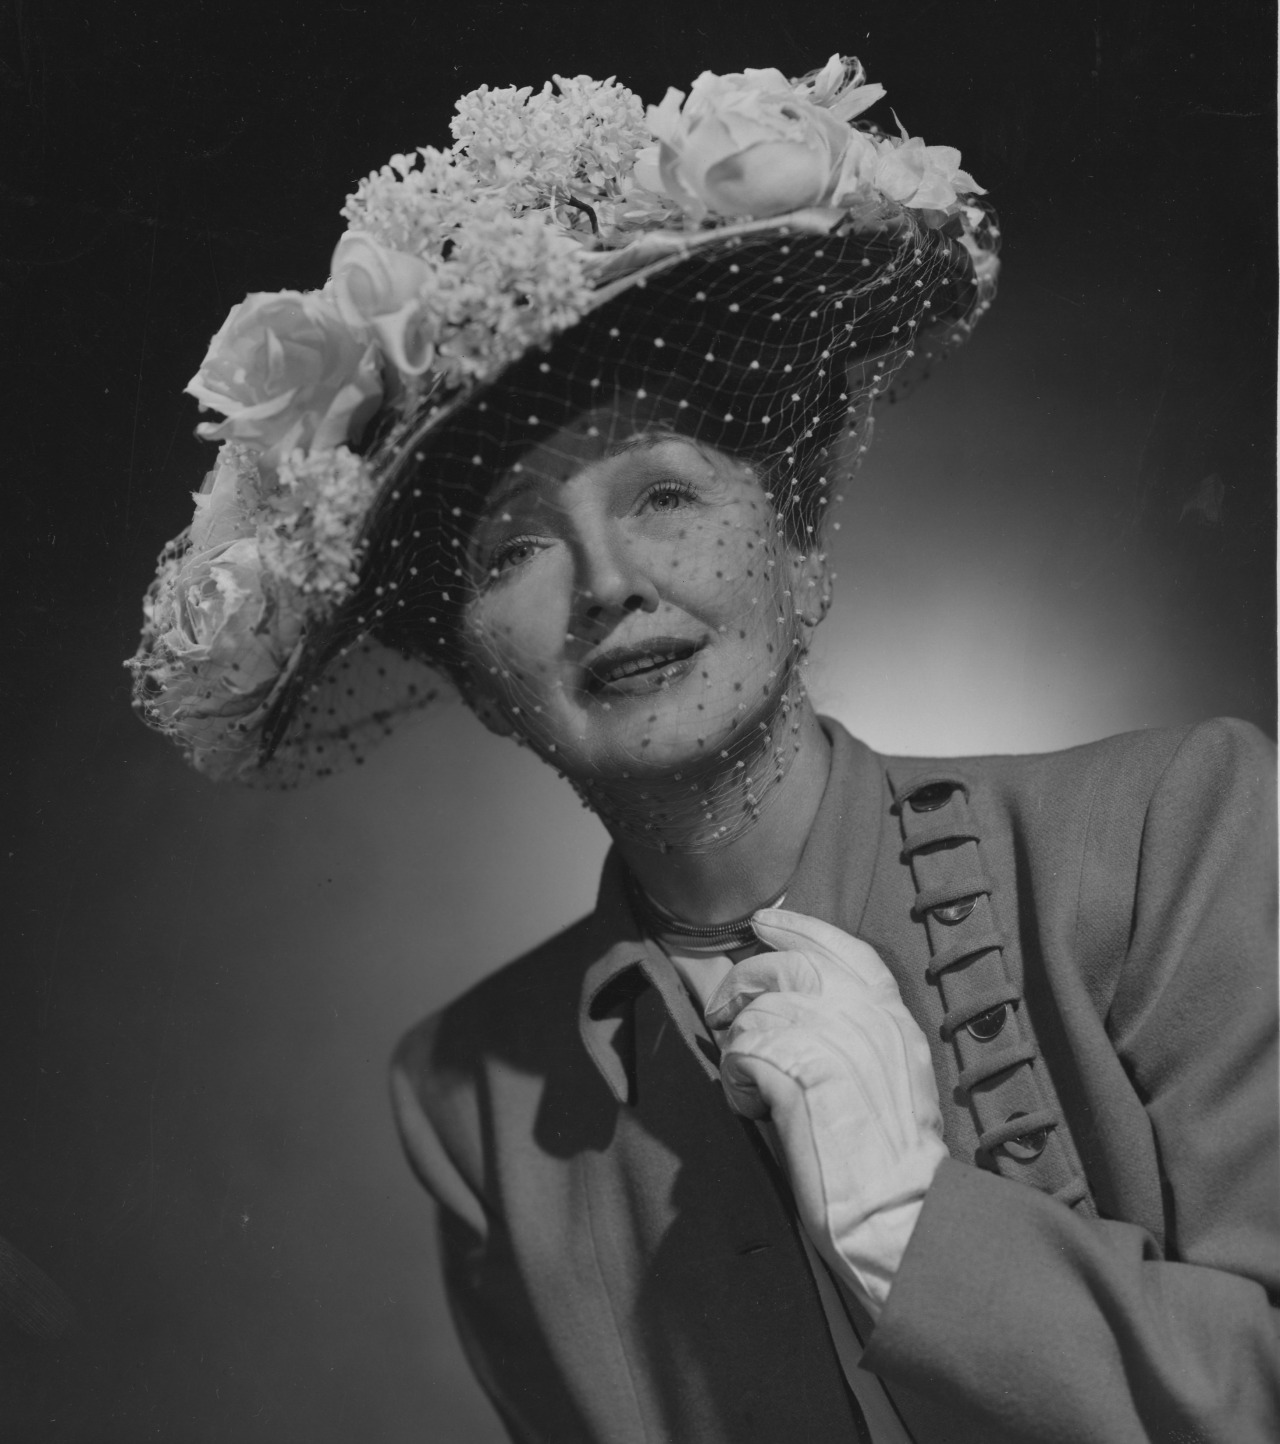 This 1950 photo by Ben Polin shows Hollywood gossip columnist Hedda Hopper in her favorite hat, an Easter bonnet created by famed designer Lilli Dache.